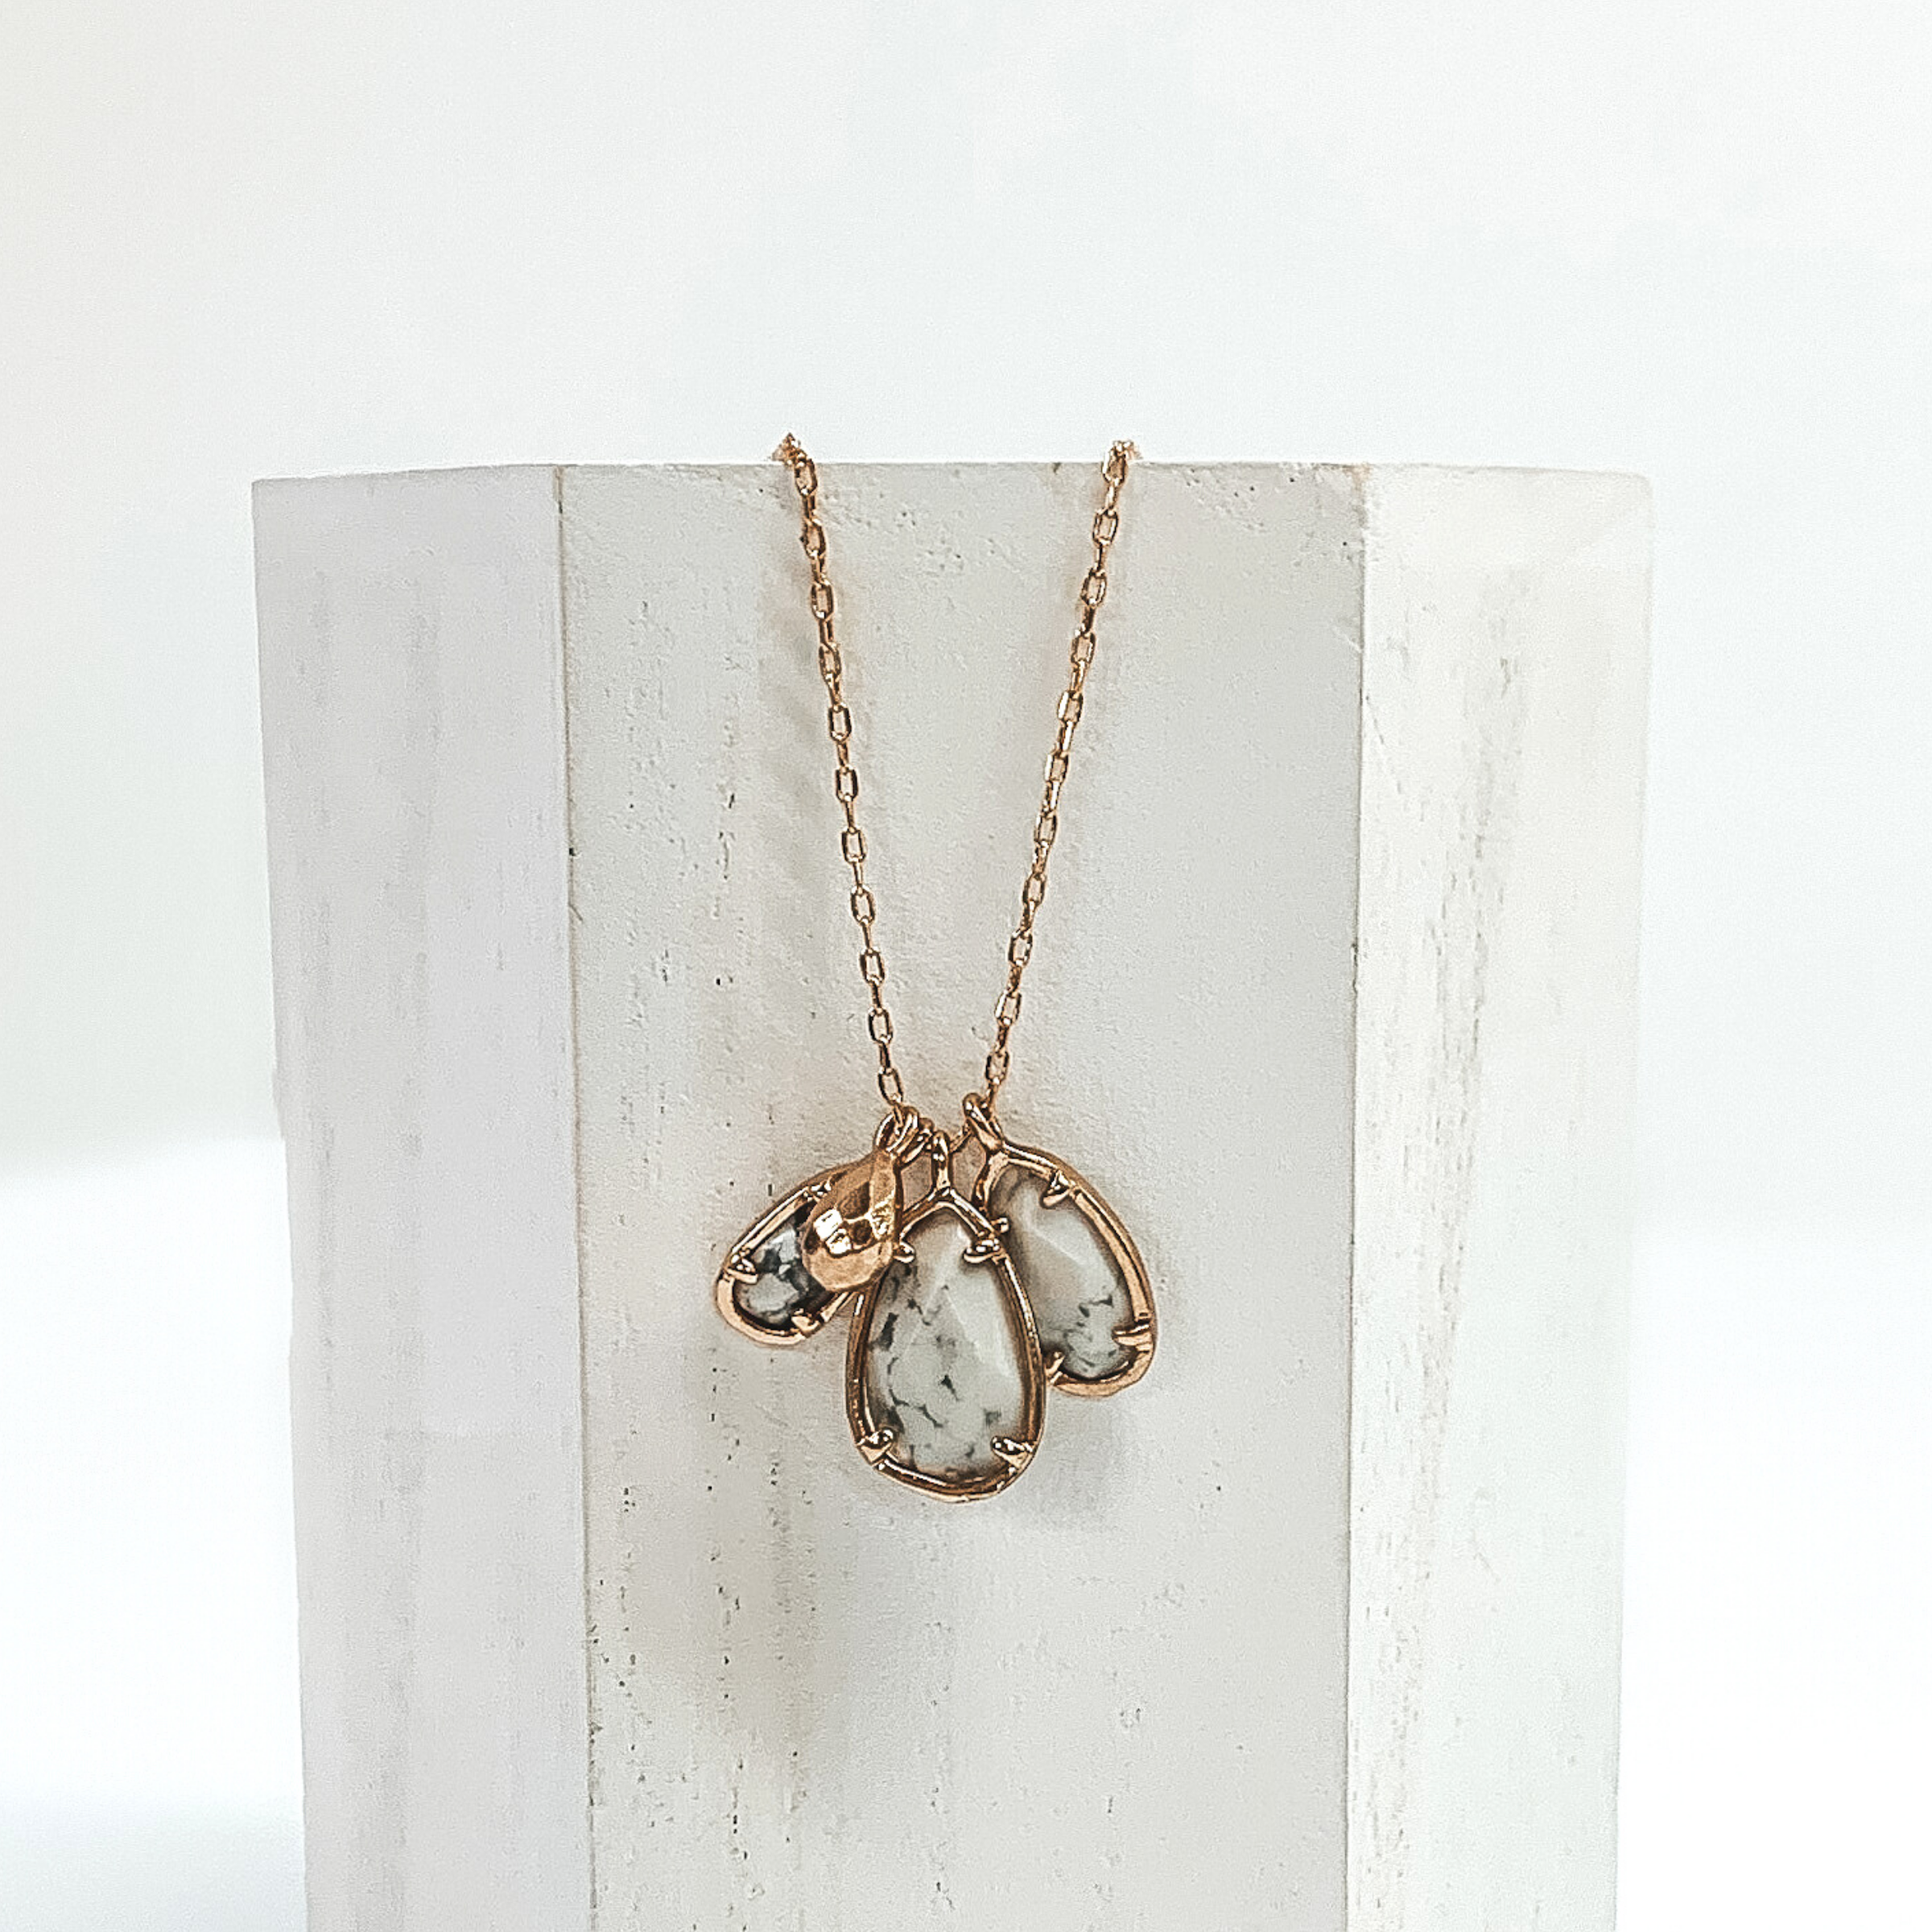 Small gold chain with three white marbled teardrop stone pendants outlined in gold. It also has a tiny gold teardrop pendant. This necklace is pictured laying a white piece of wood on a white background. 